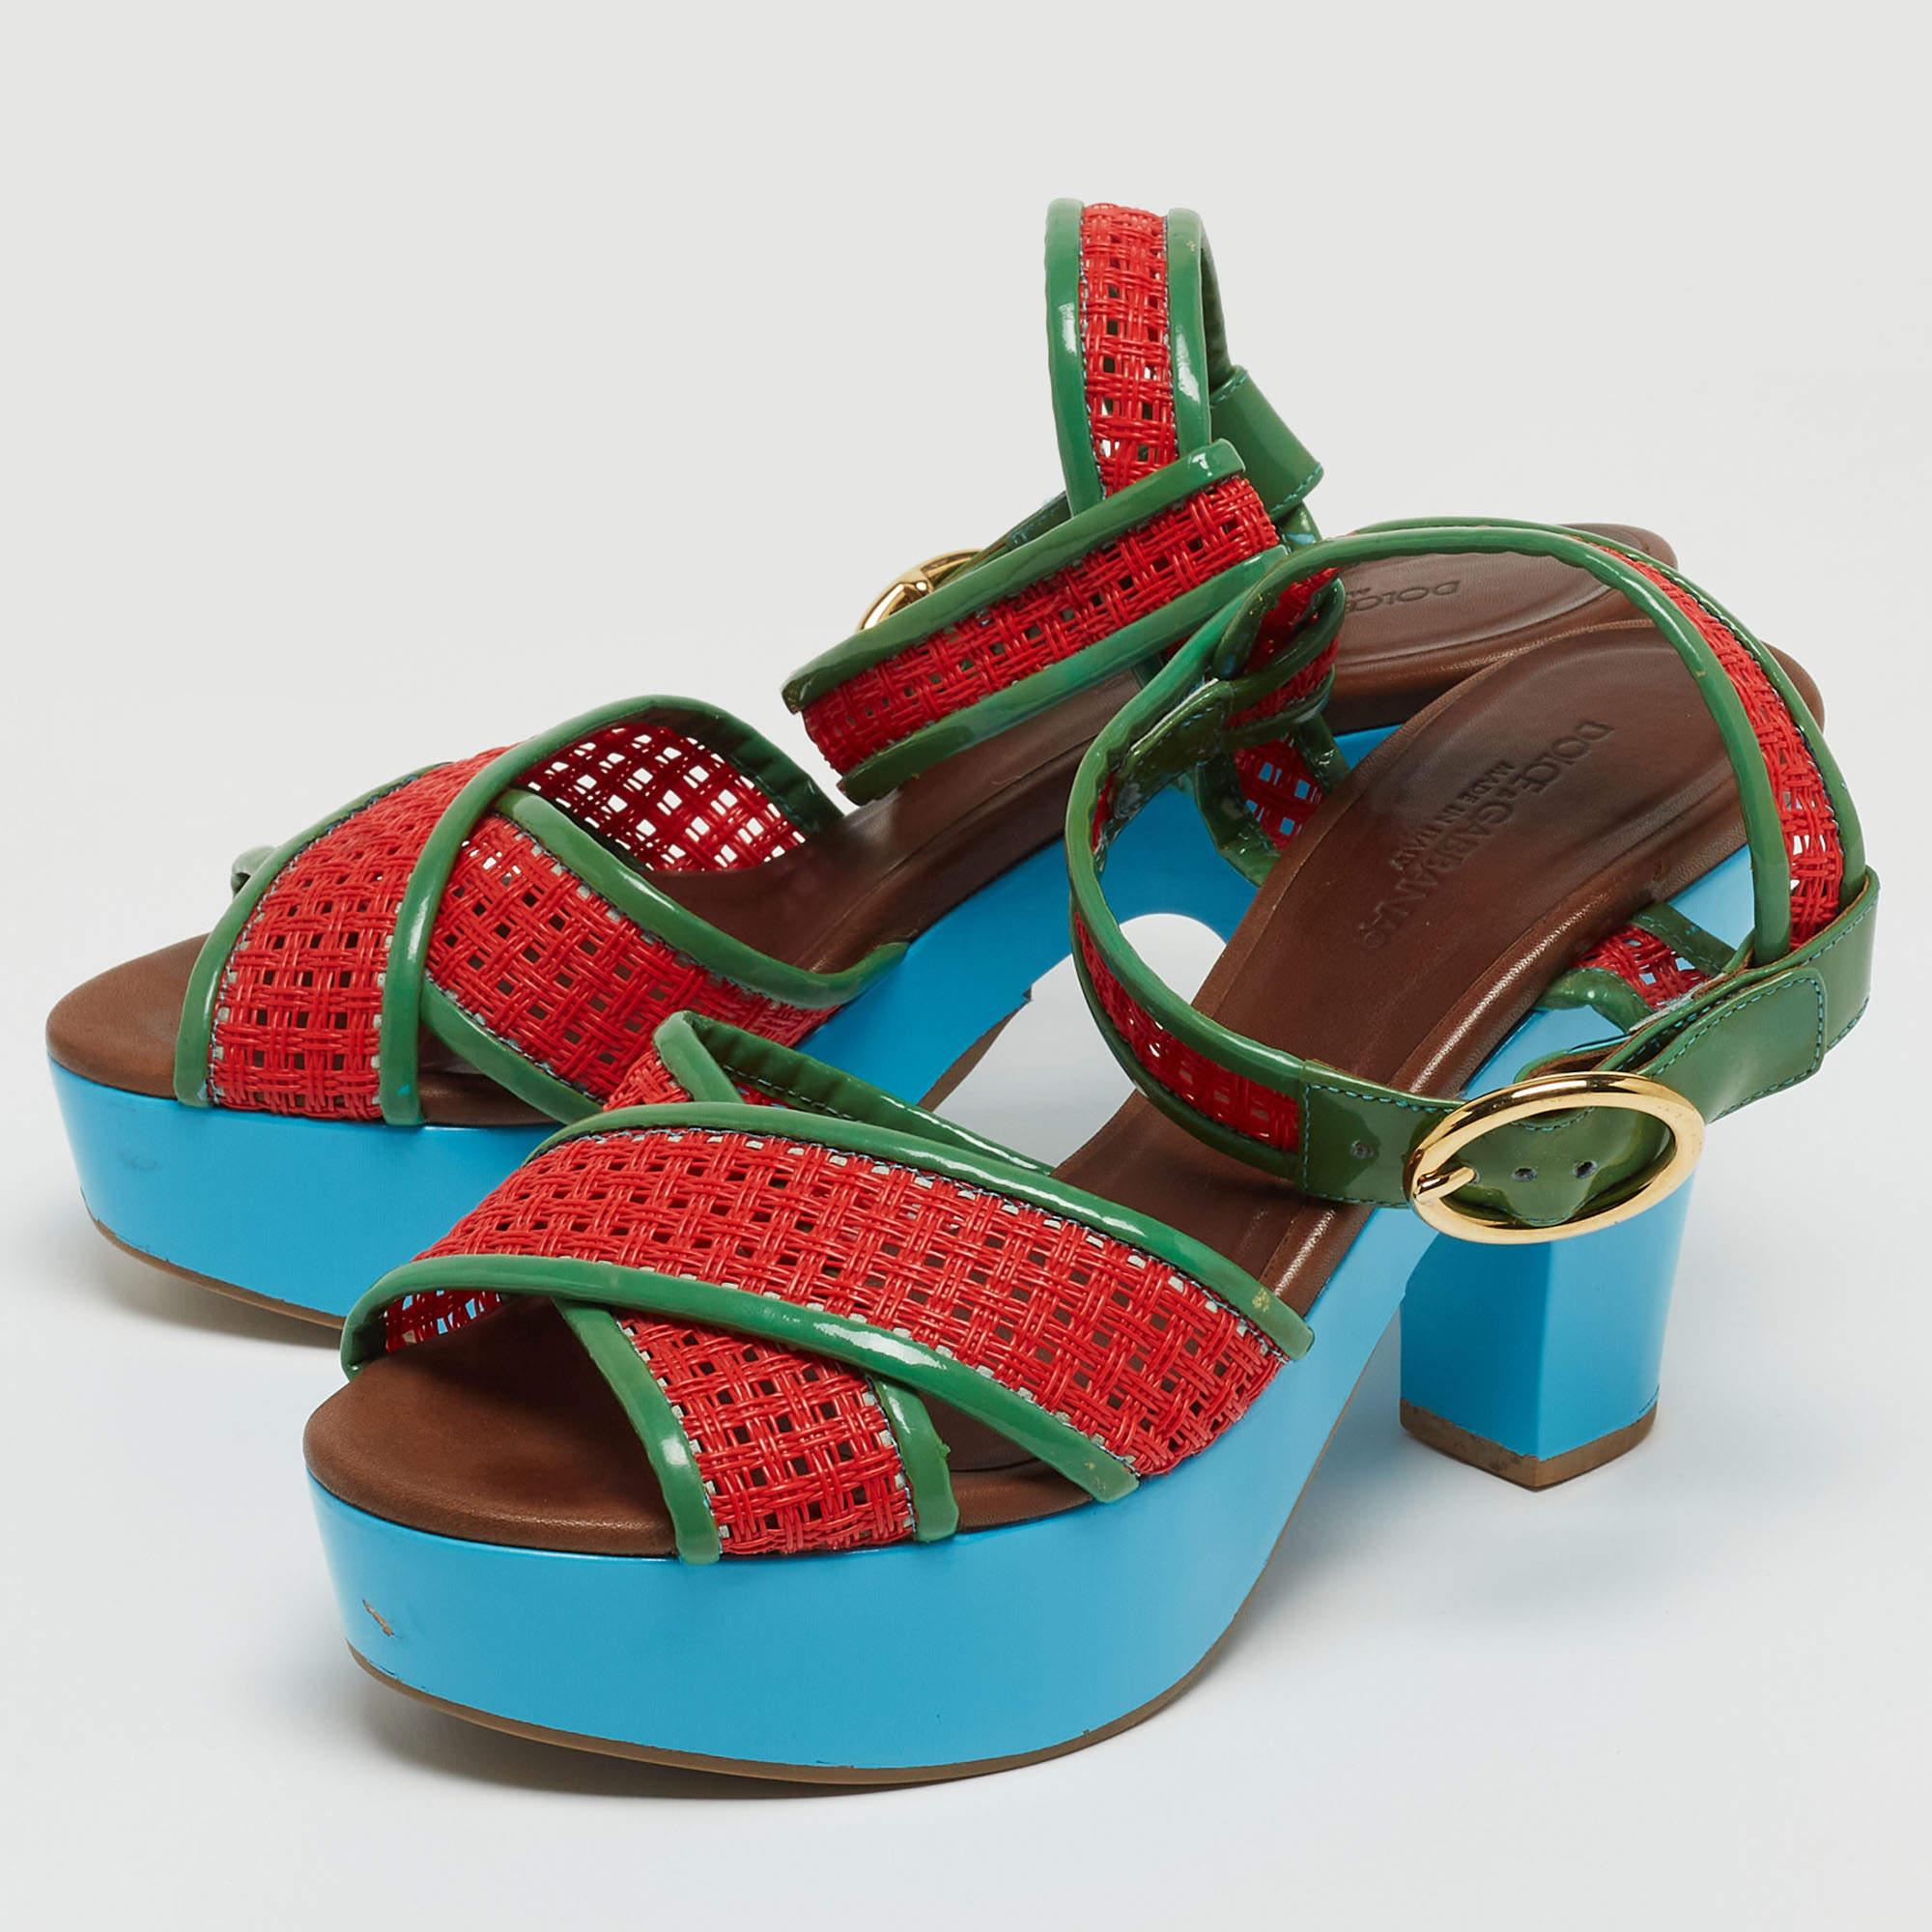 Dolce & Gabbana Green/Red Patent Leather Cross Strap Platform Ankle Strap Sandal In Good Condition For Sale In Dubai, Al Qouz 2